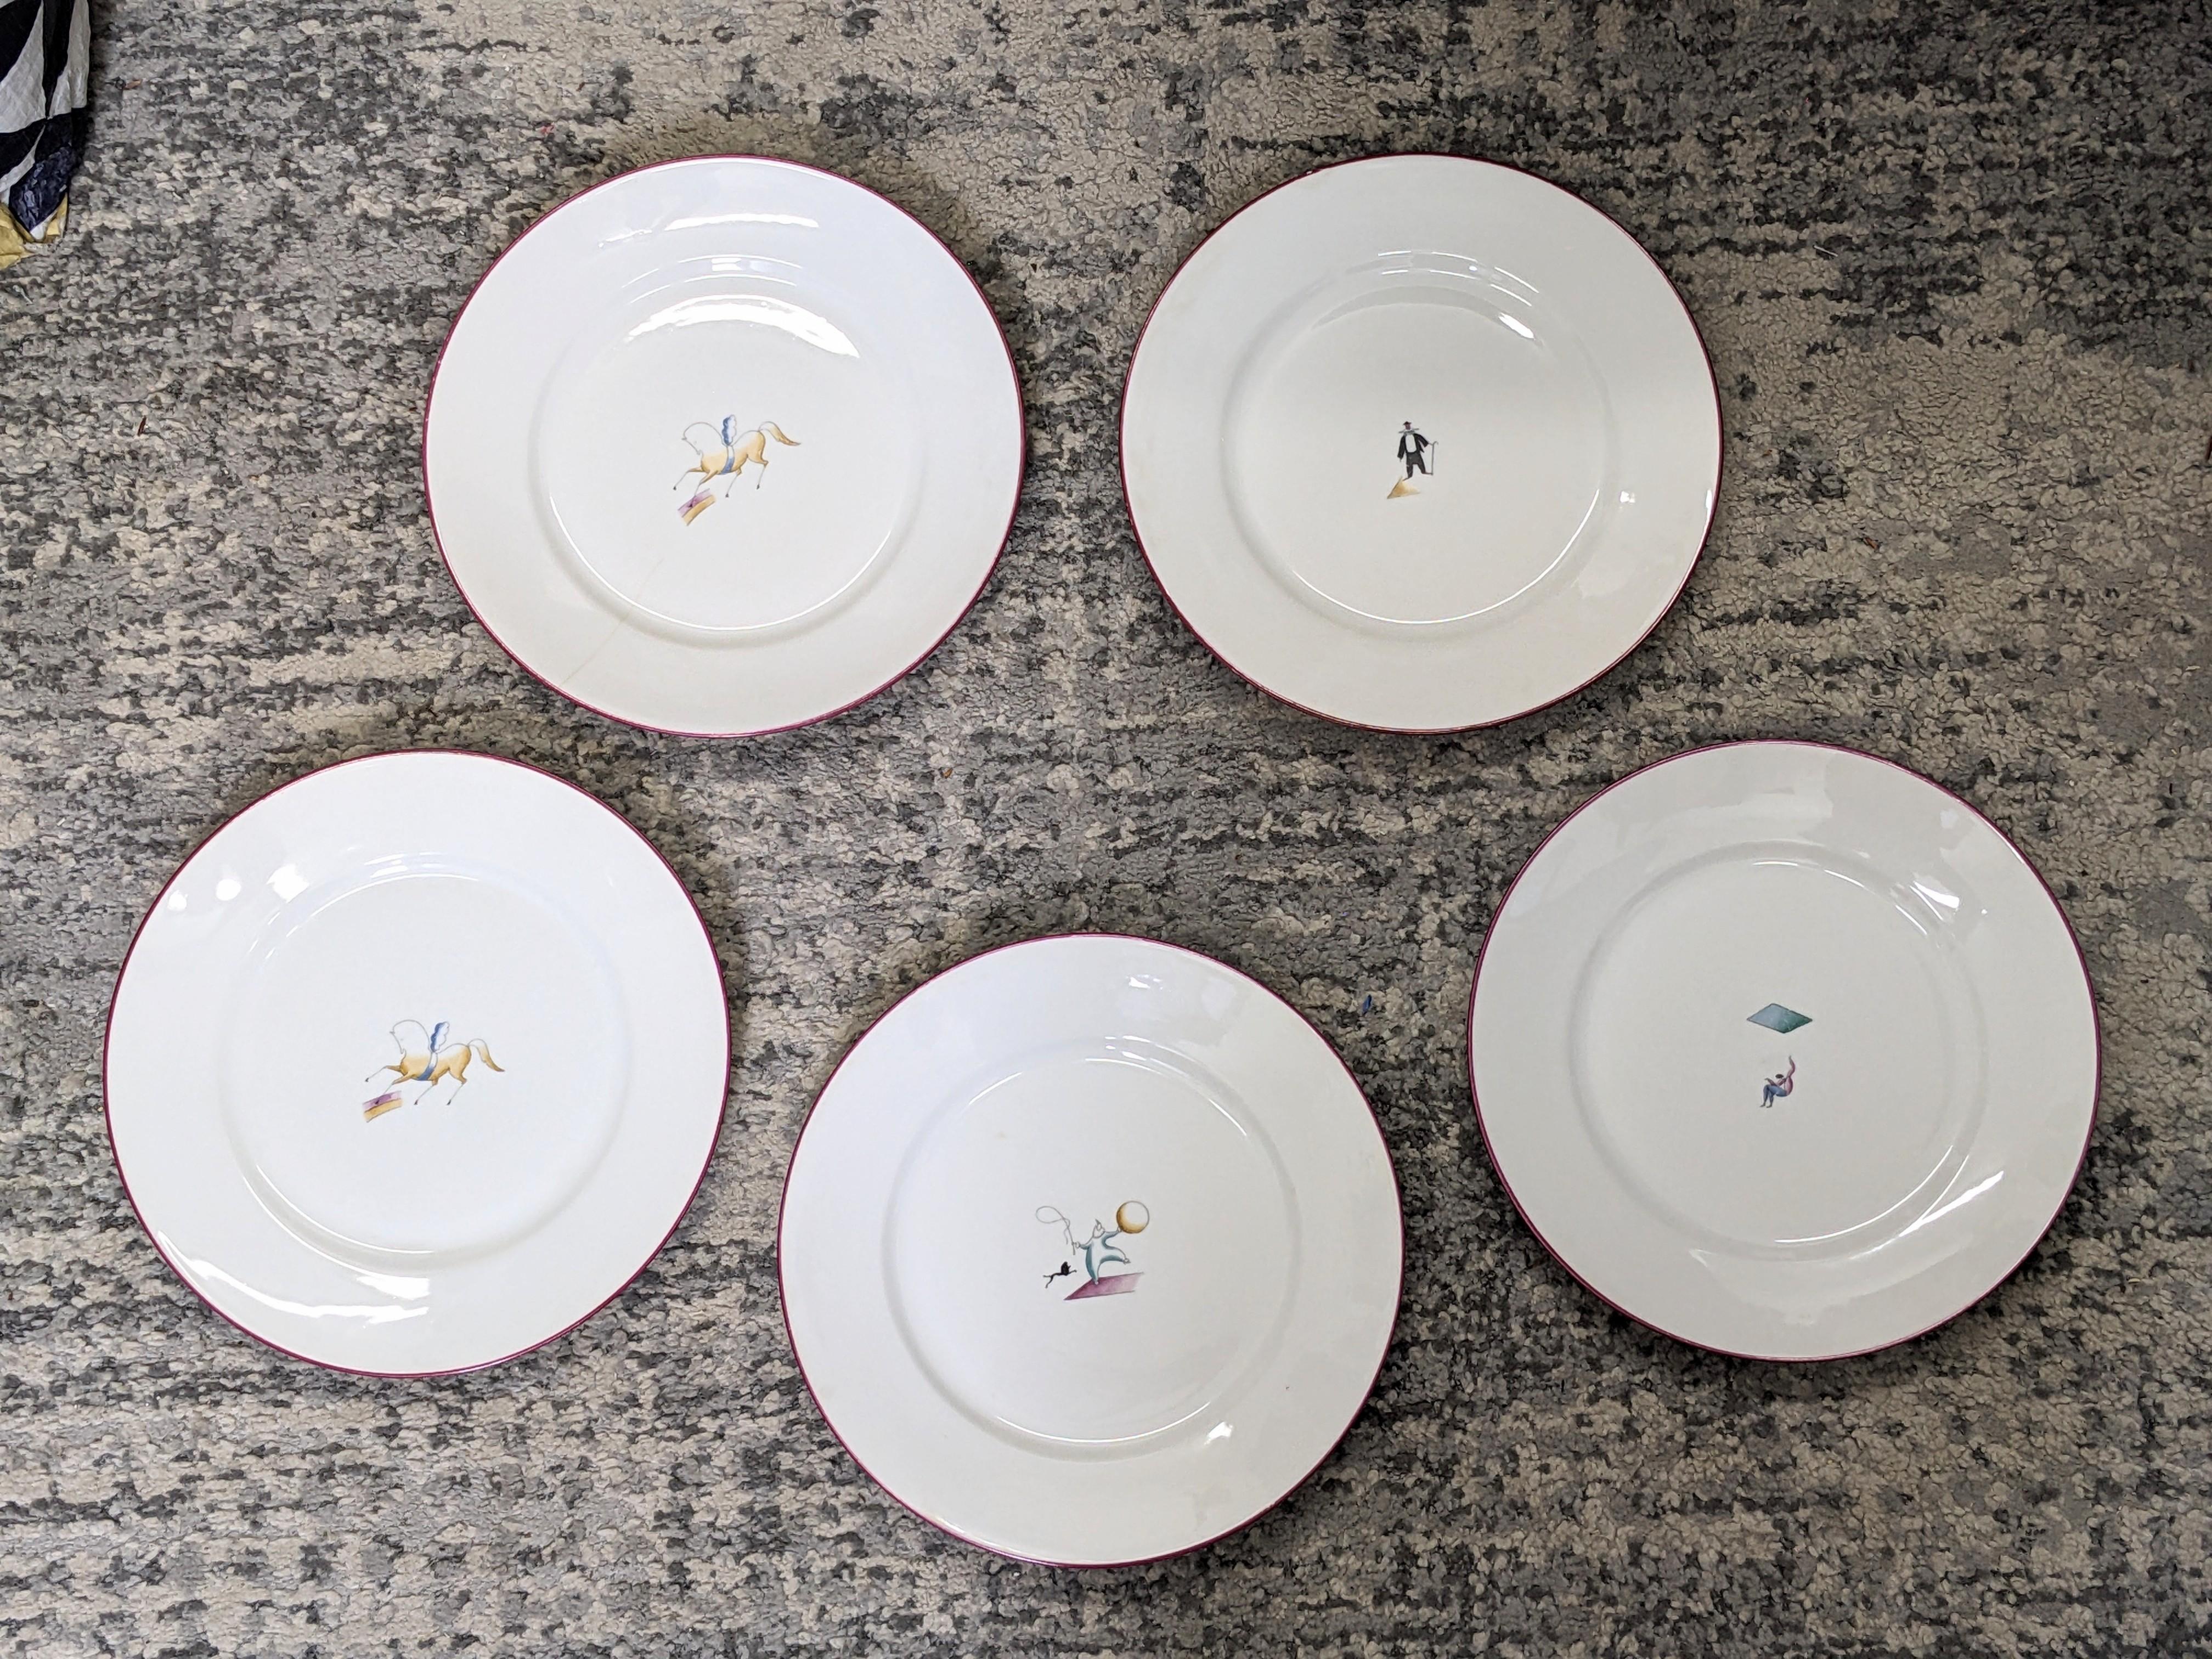 Il Circo (circus) dinner plates from the mid 1930's Italy designed by Gio Ponti for Ginori. Each decorated with a charming Modernist figure of a circus performer or animal. Priced PER PIECE. 1930's Italy. 10